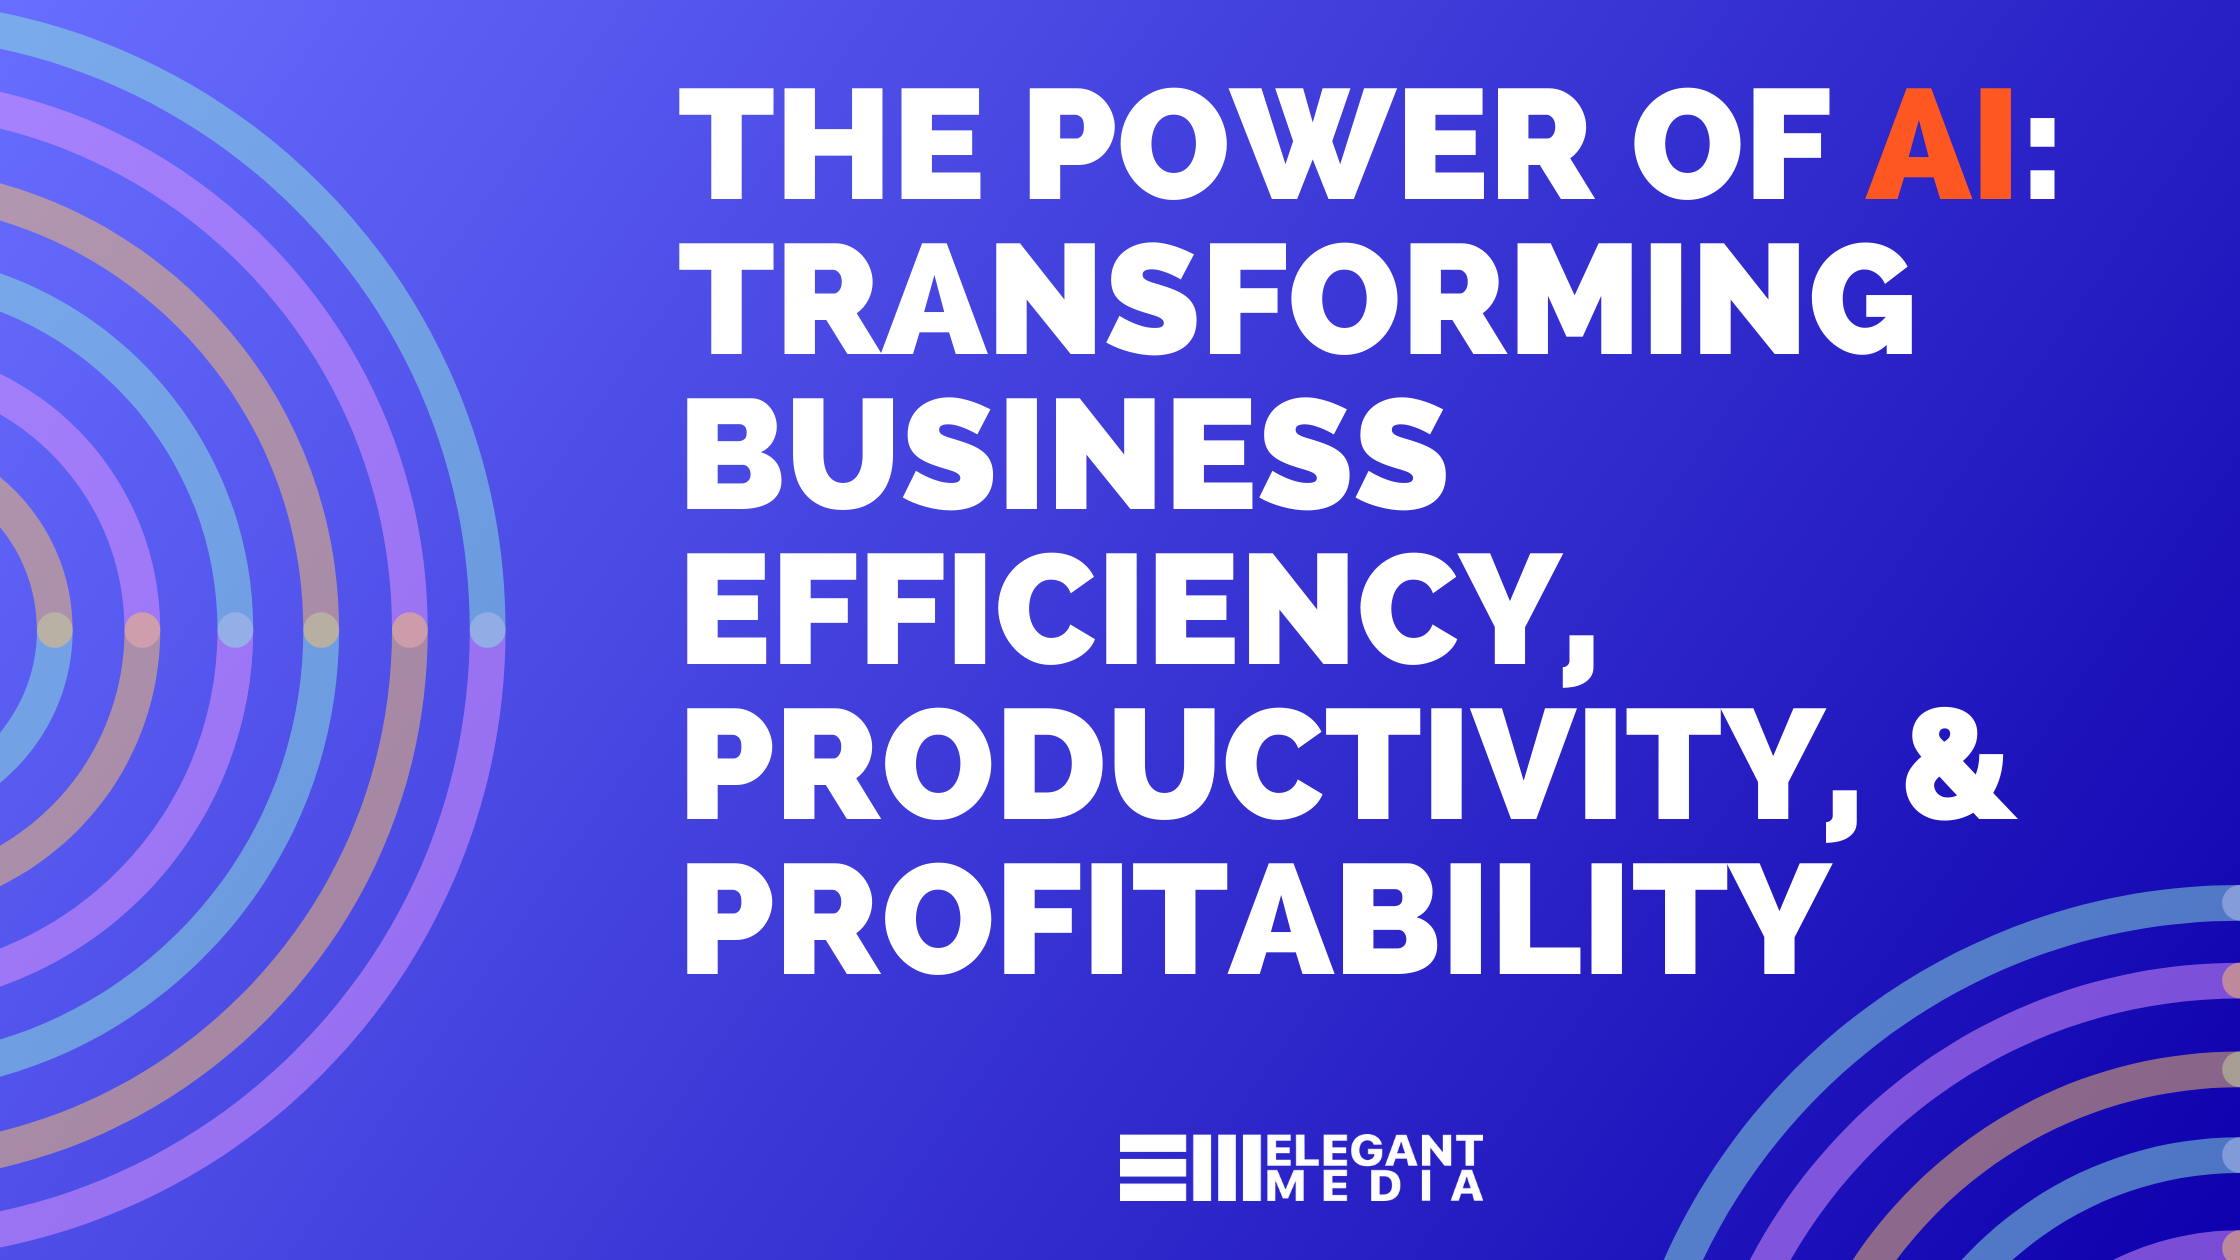 The Power of AI: Transforming Business Efficiency, Productivity, and Profitability